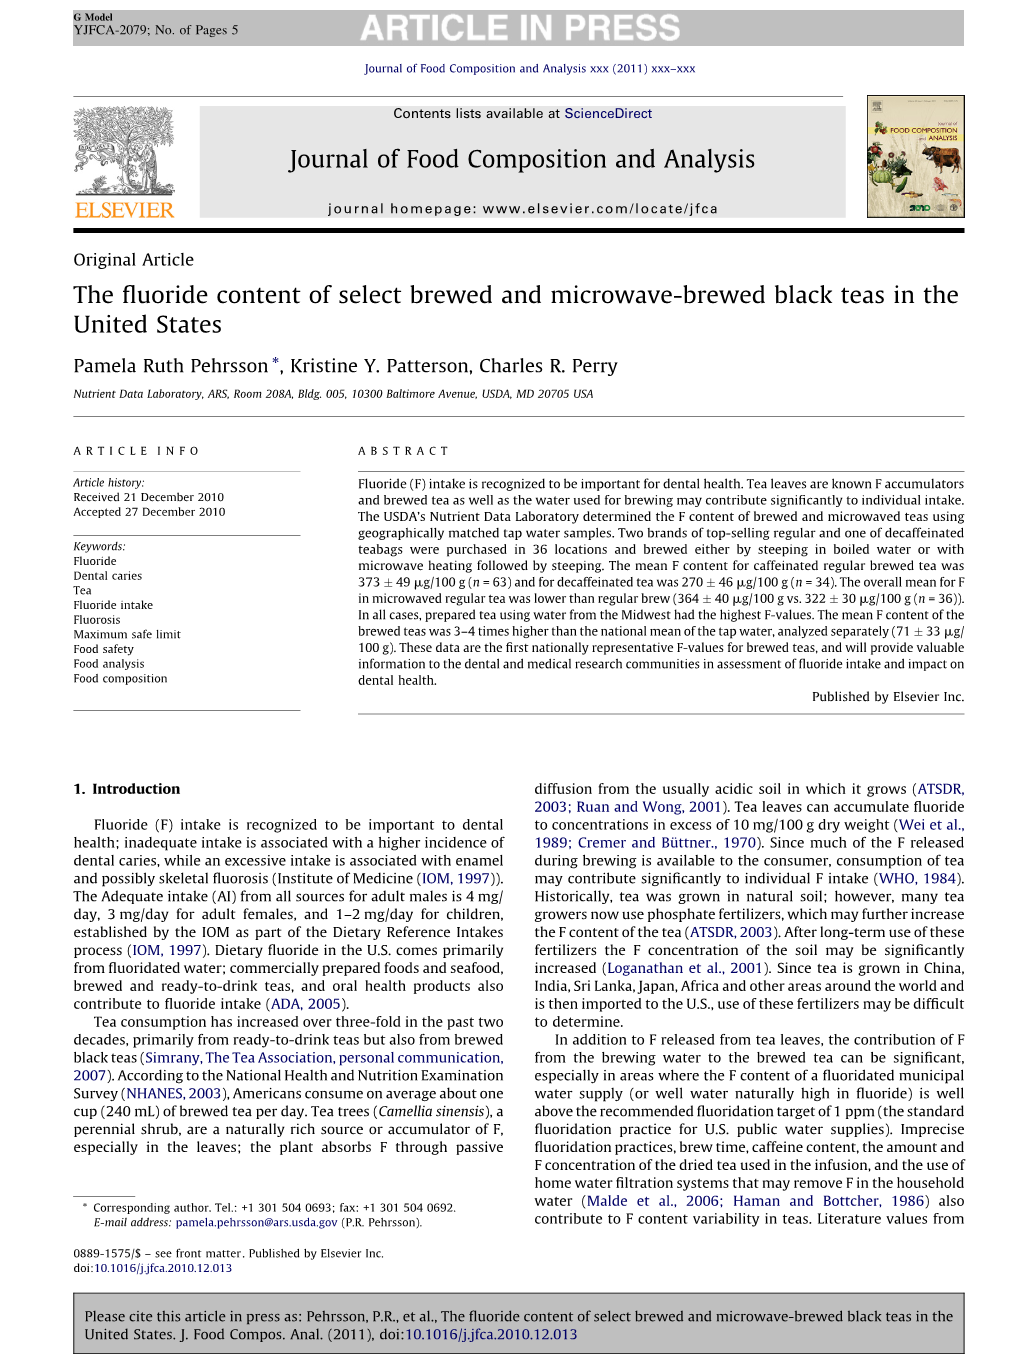 The Fluoride Content of Select Brewed and Microwave-Brewed Black Teas